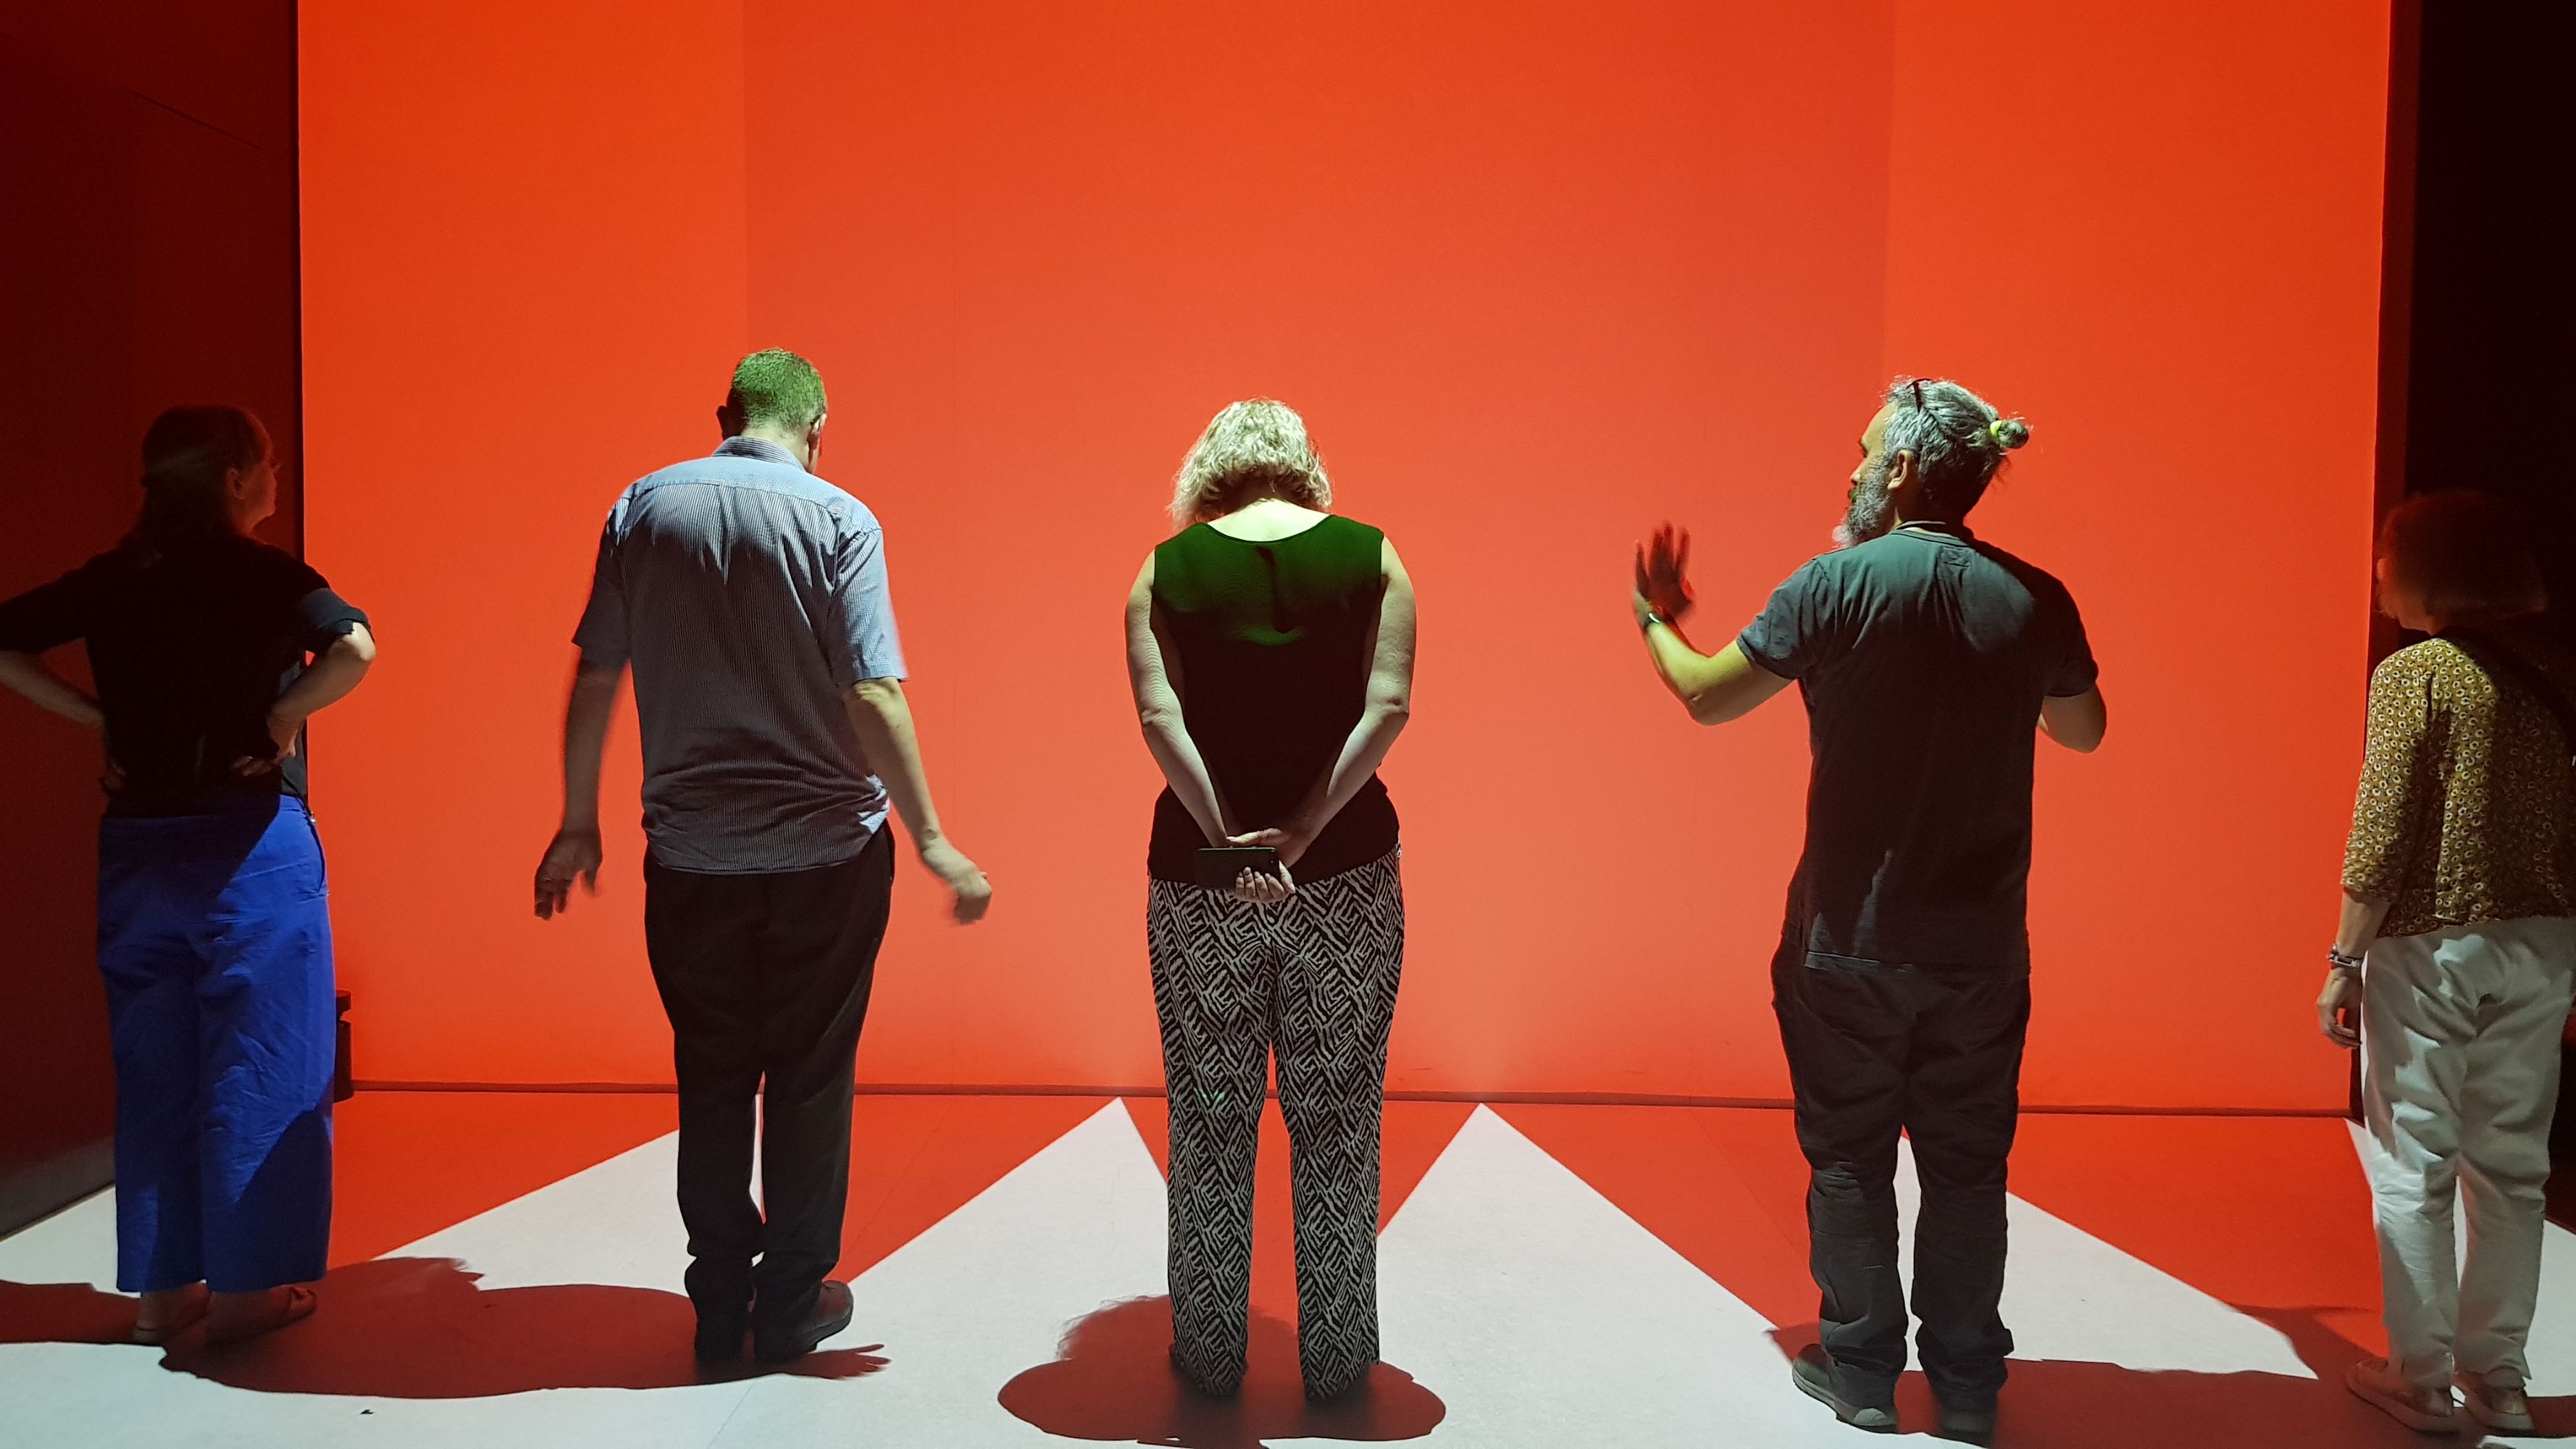 Five people with their back to the camera are standing in front of a big orange wall.  